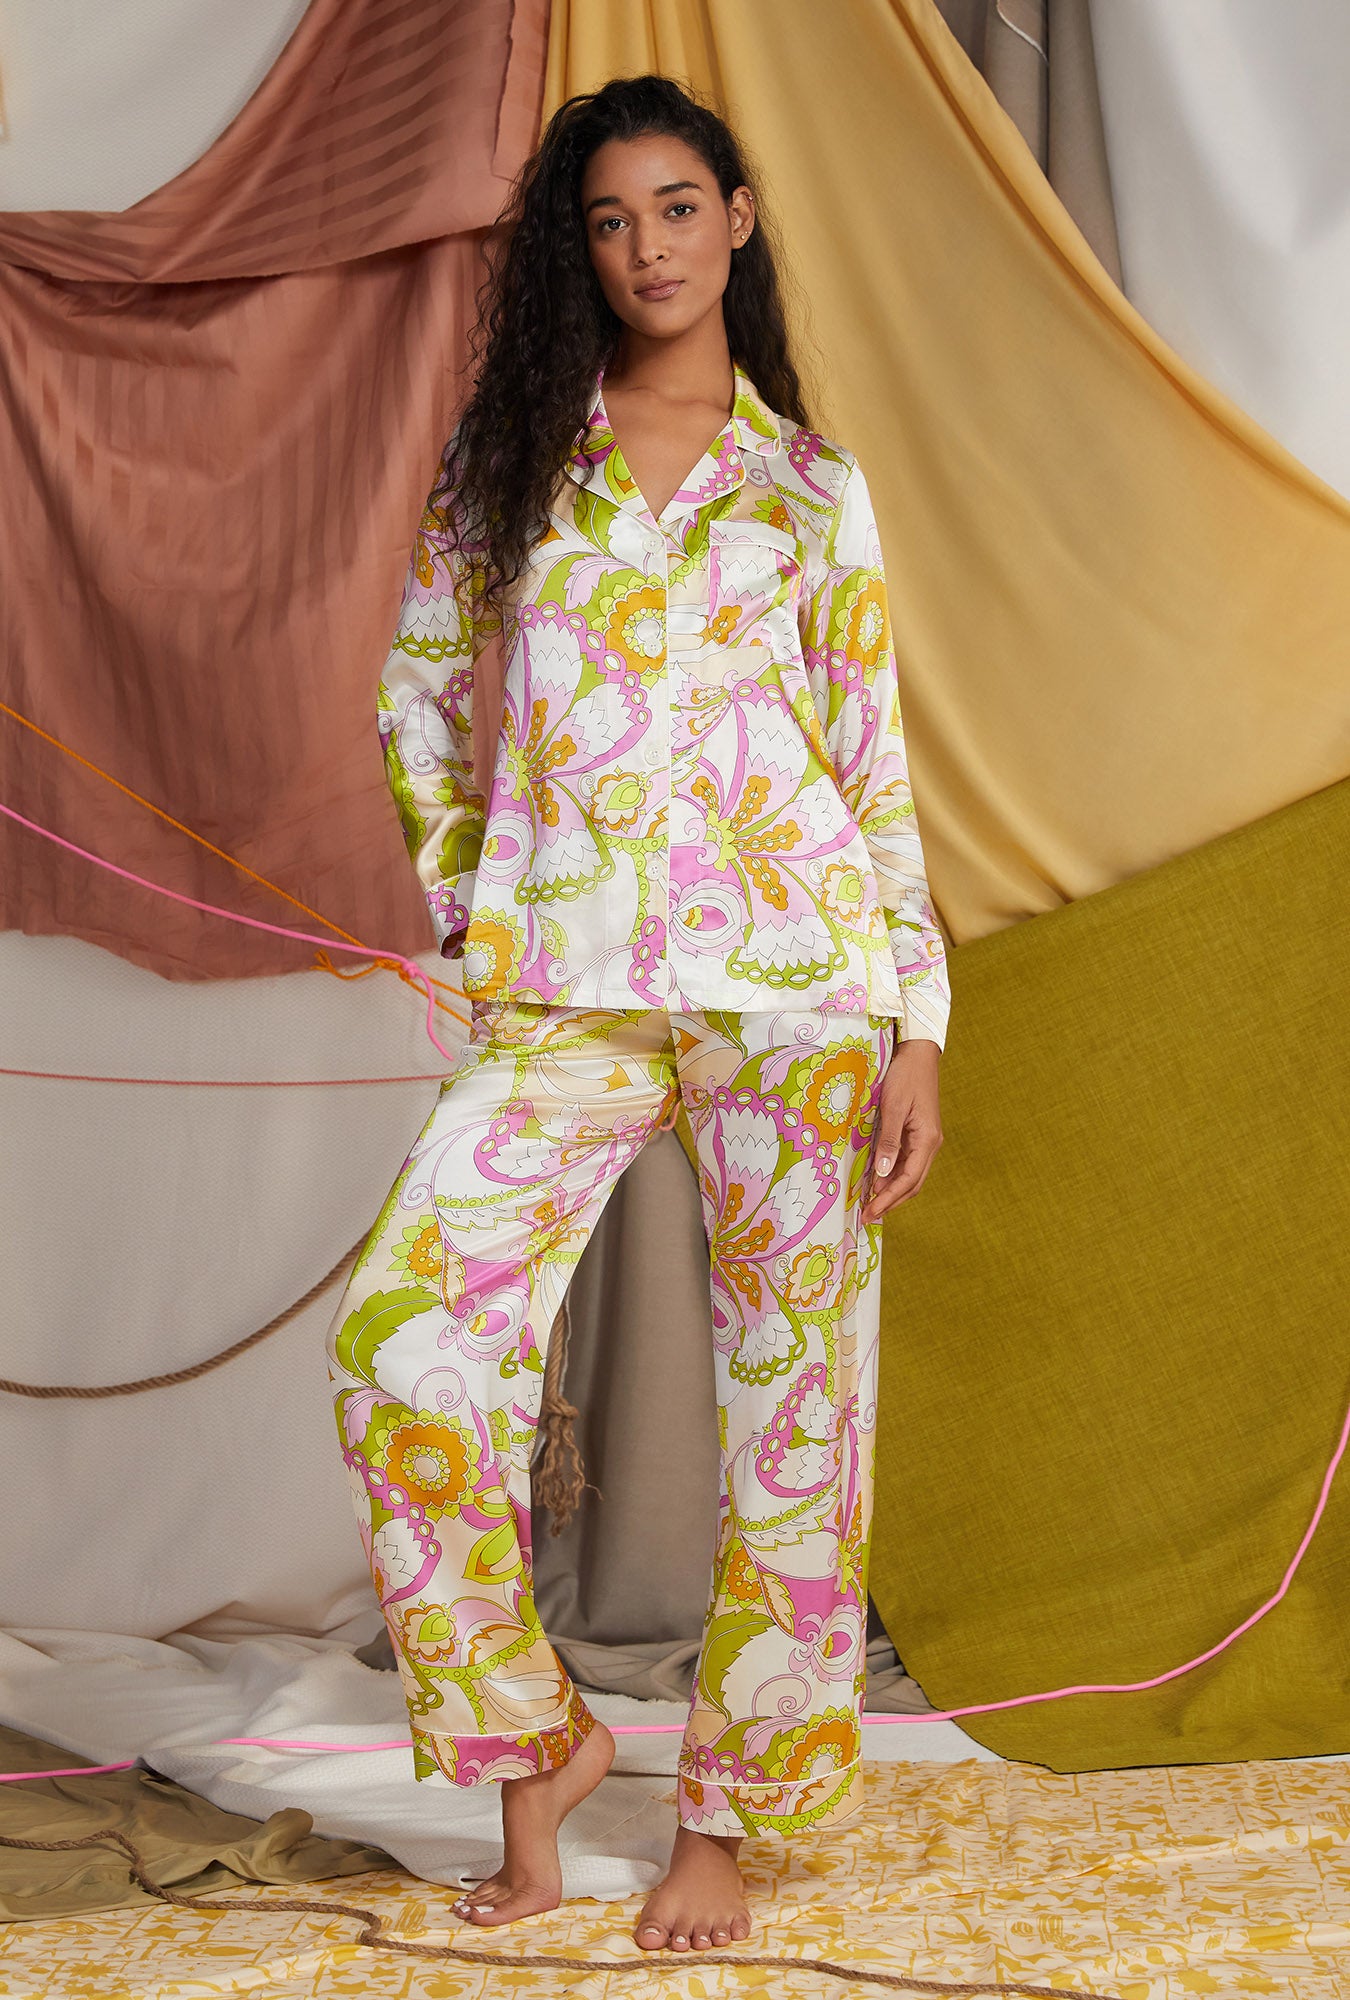 A lady wearing floral long sleeve classic washable pj set with trina turk print